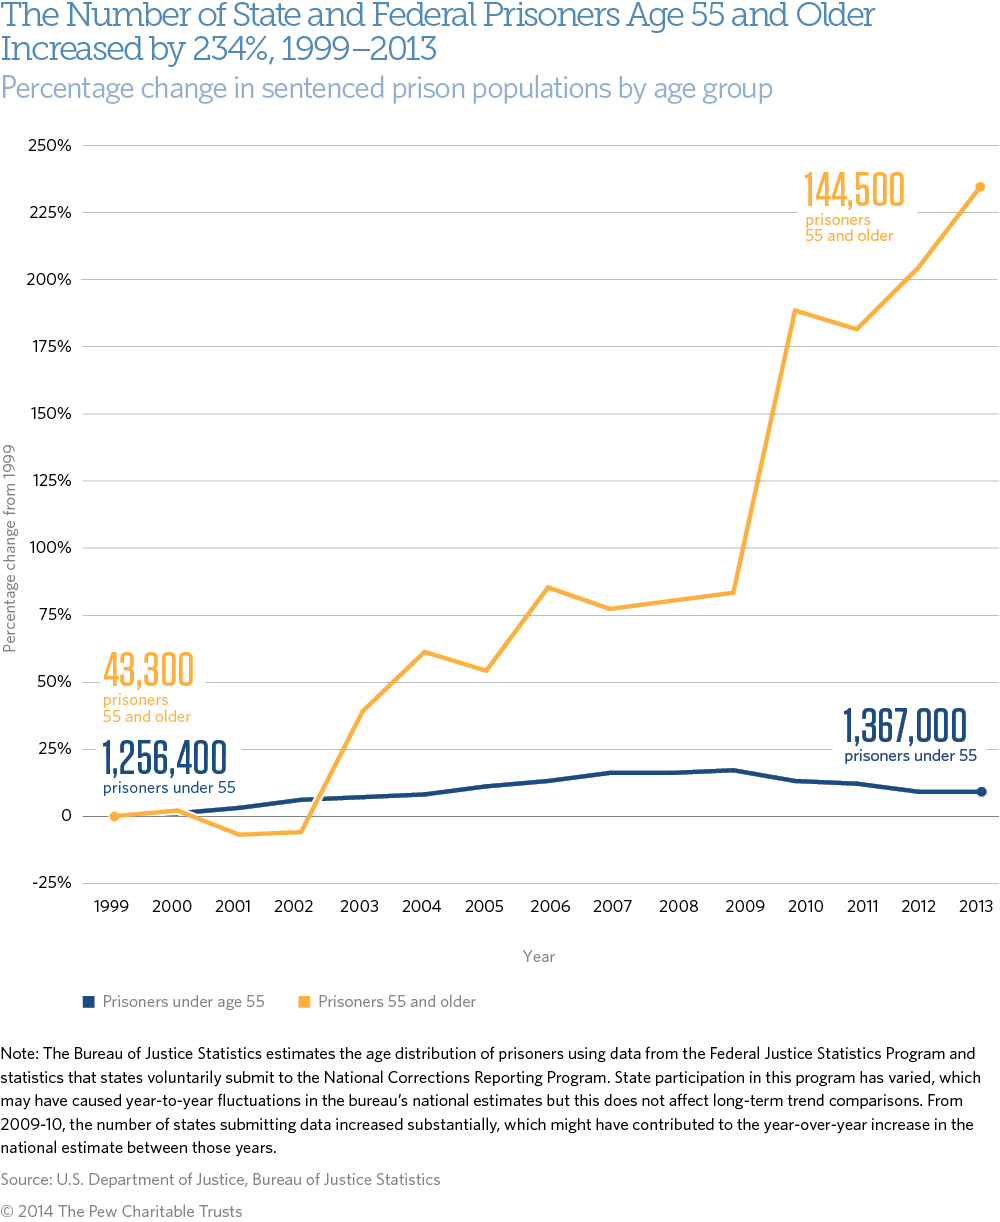 The Number of State and Federal Prisoners Age 55 and Older Increased by 234%, 1999-2013